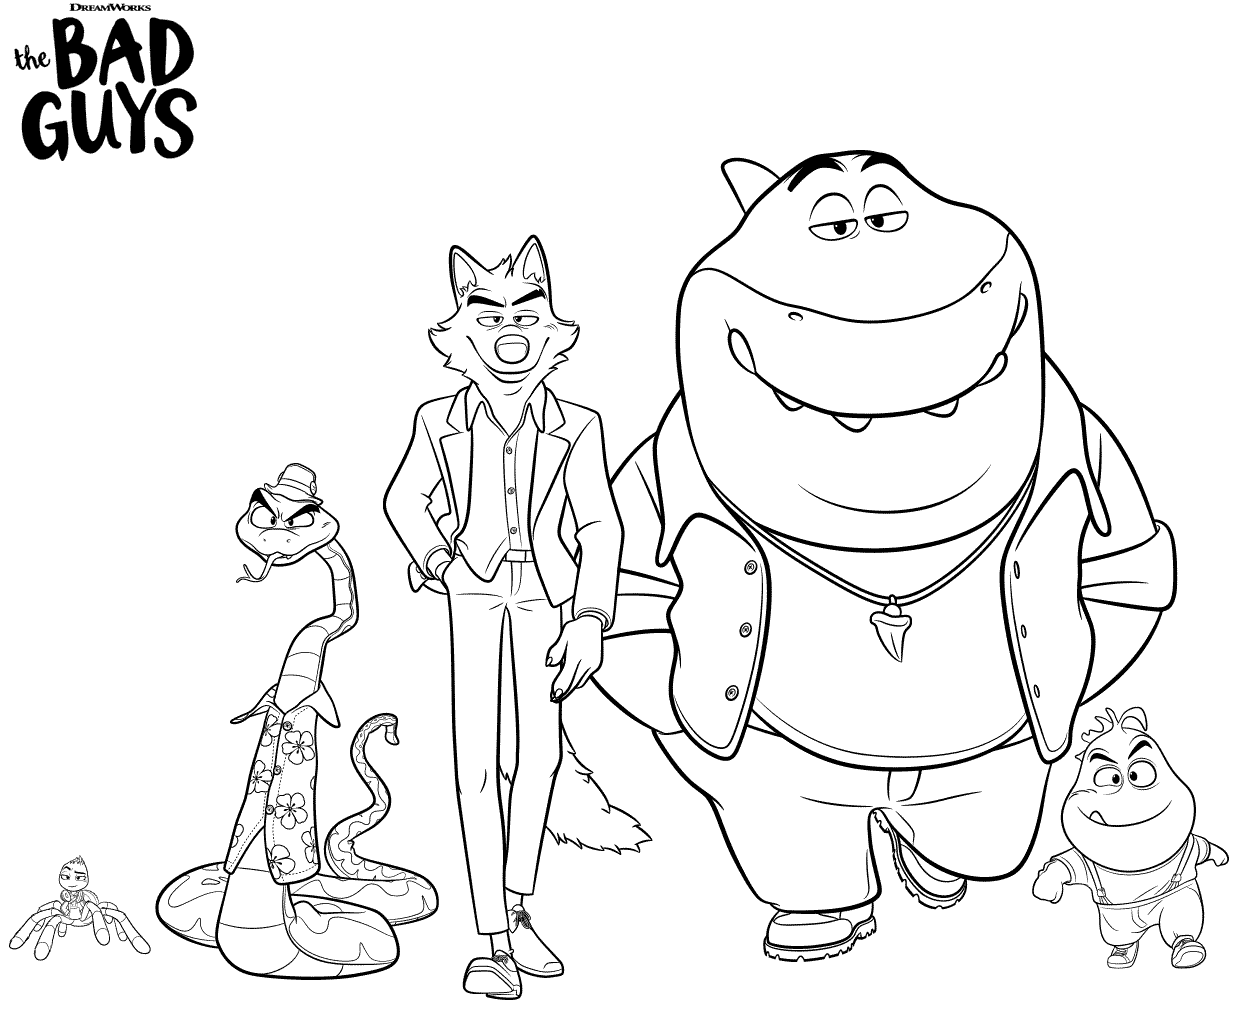 The Bad Guys Coloring Pages - The Bad Guys Coloring Pages - Coloring Pages  For Kids And Adults